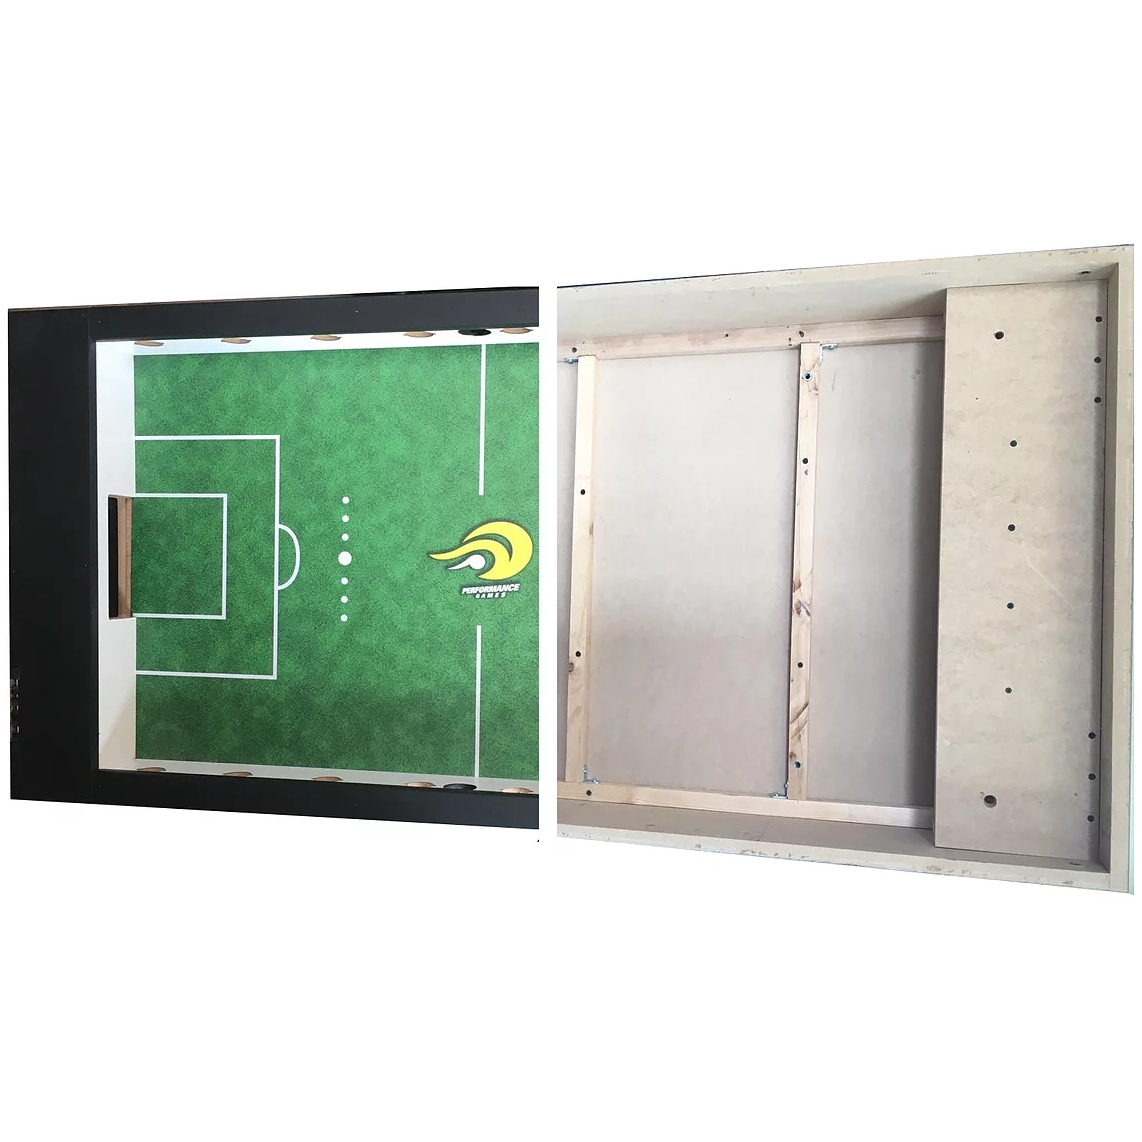 performance games sure shot rp foosball table view top and bottom of table